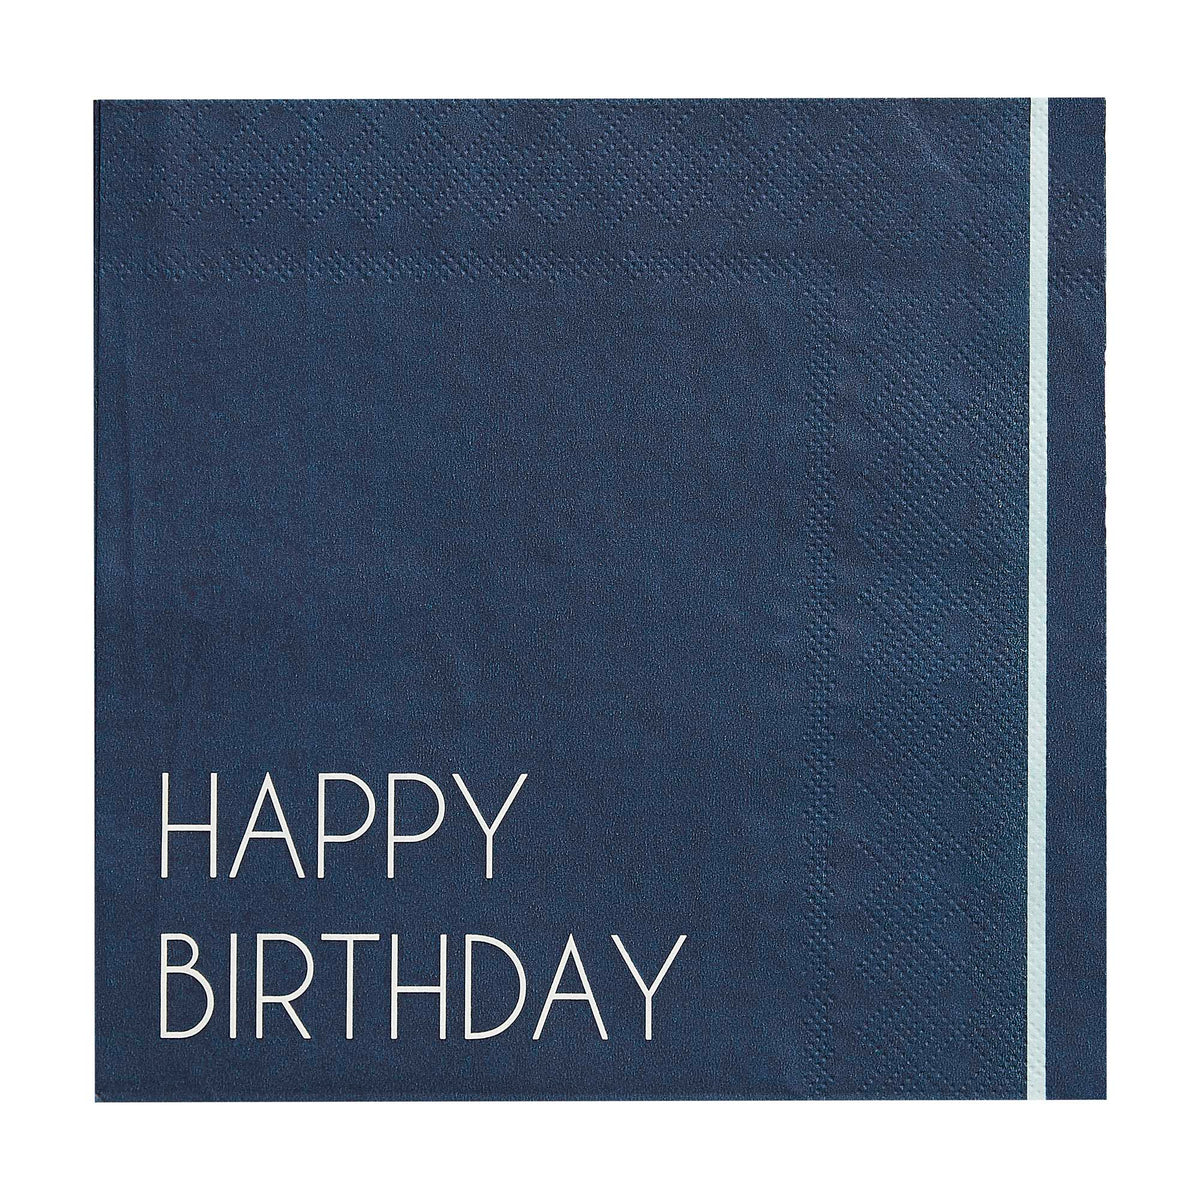 AMSCAN CA General Birthday Happy Birthday Large Lunch Napkins, Blue, 16 Count 5056567029249